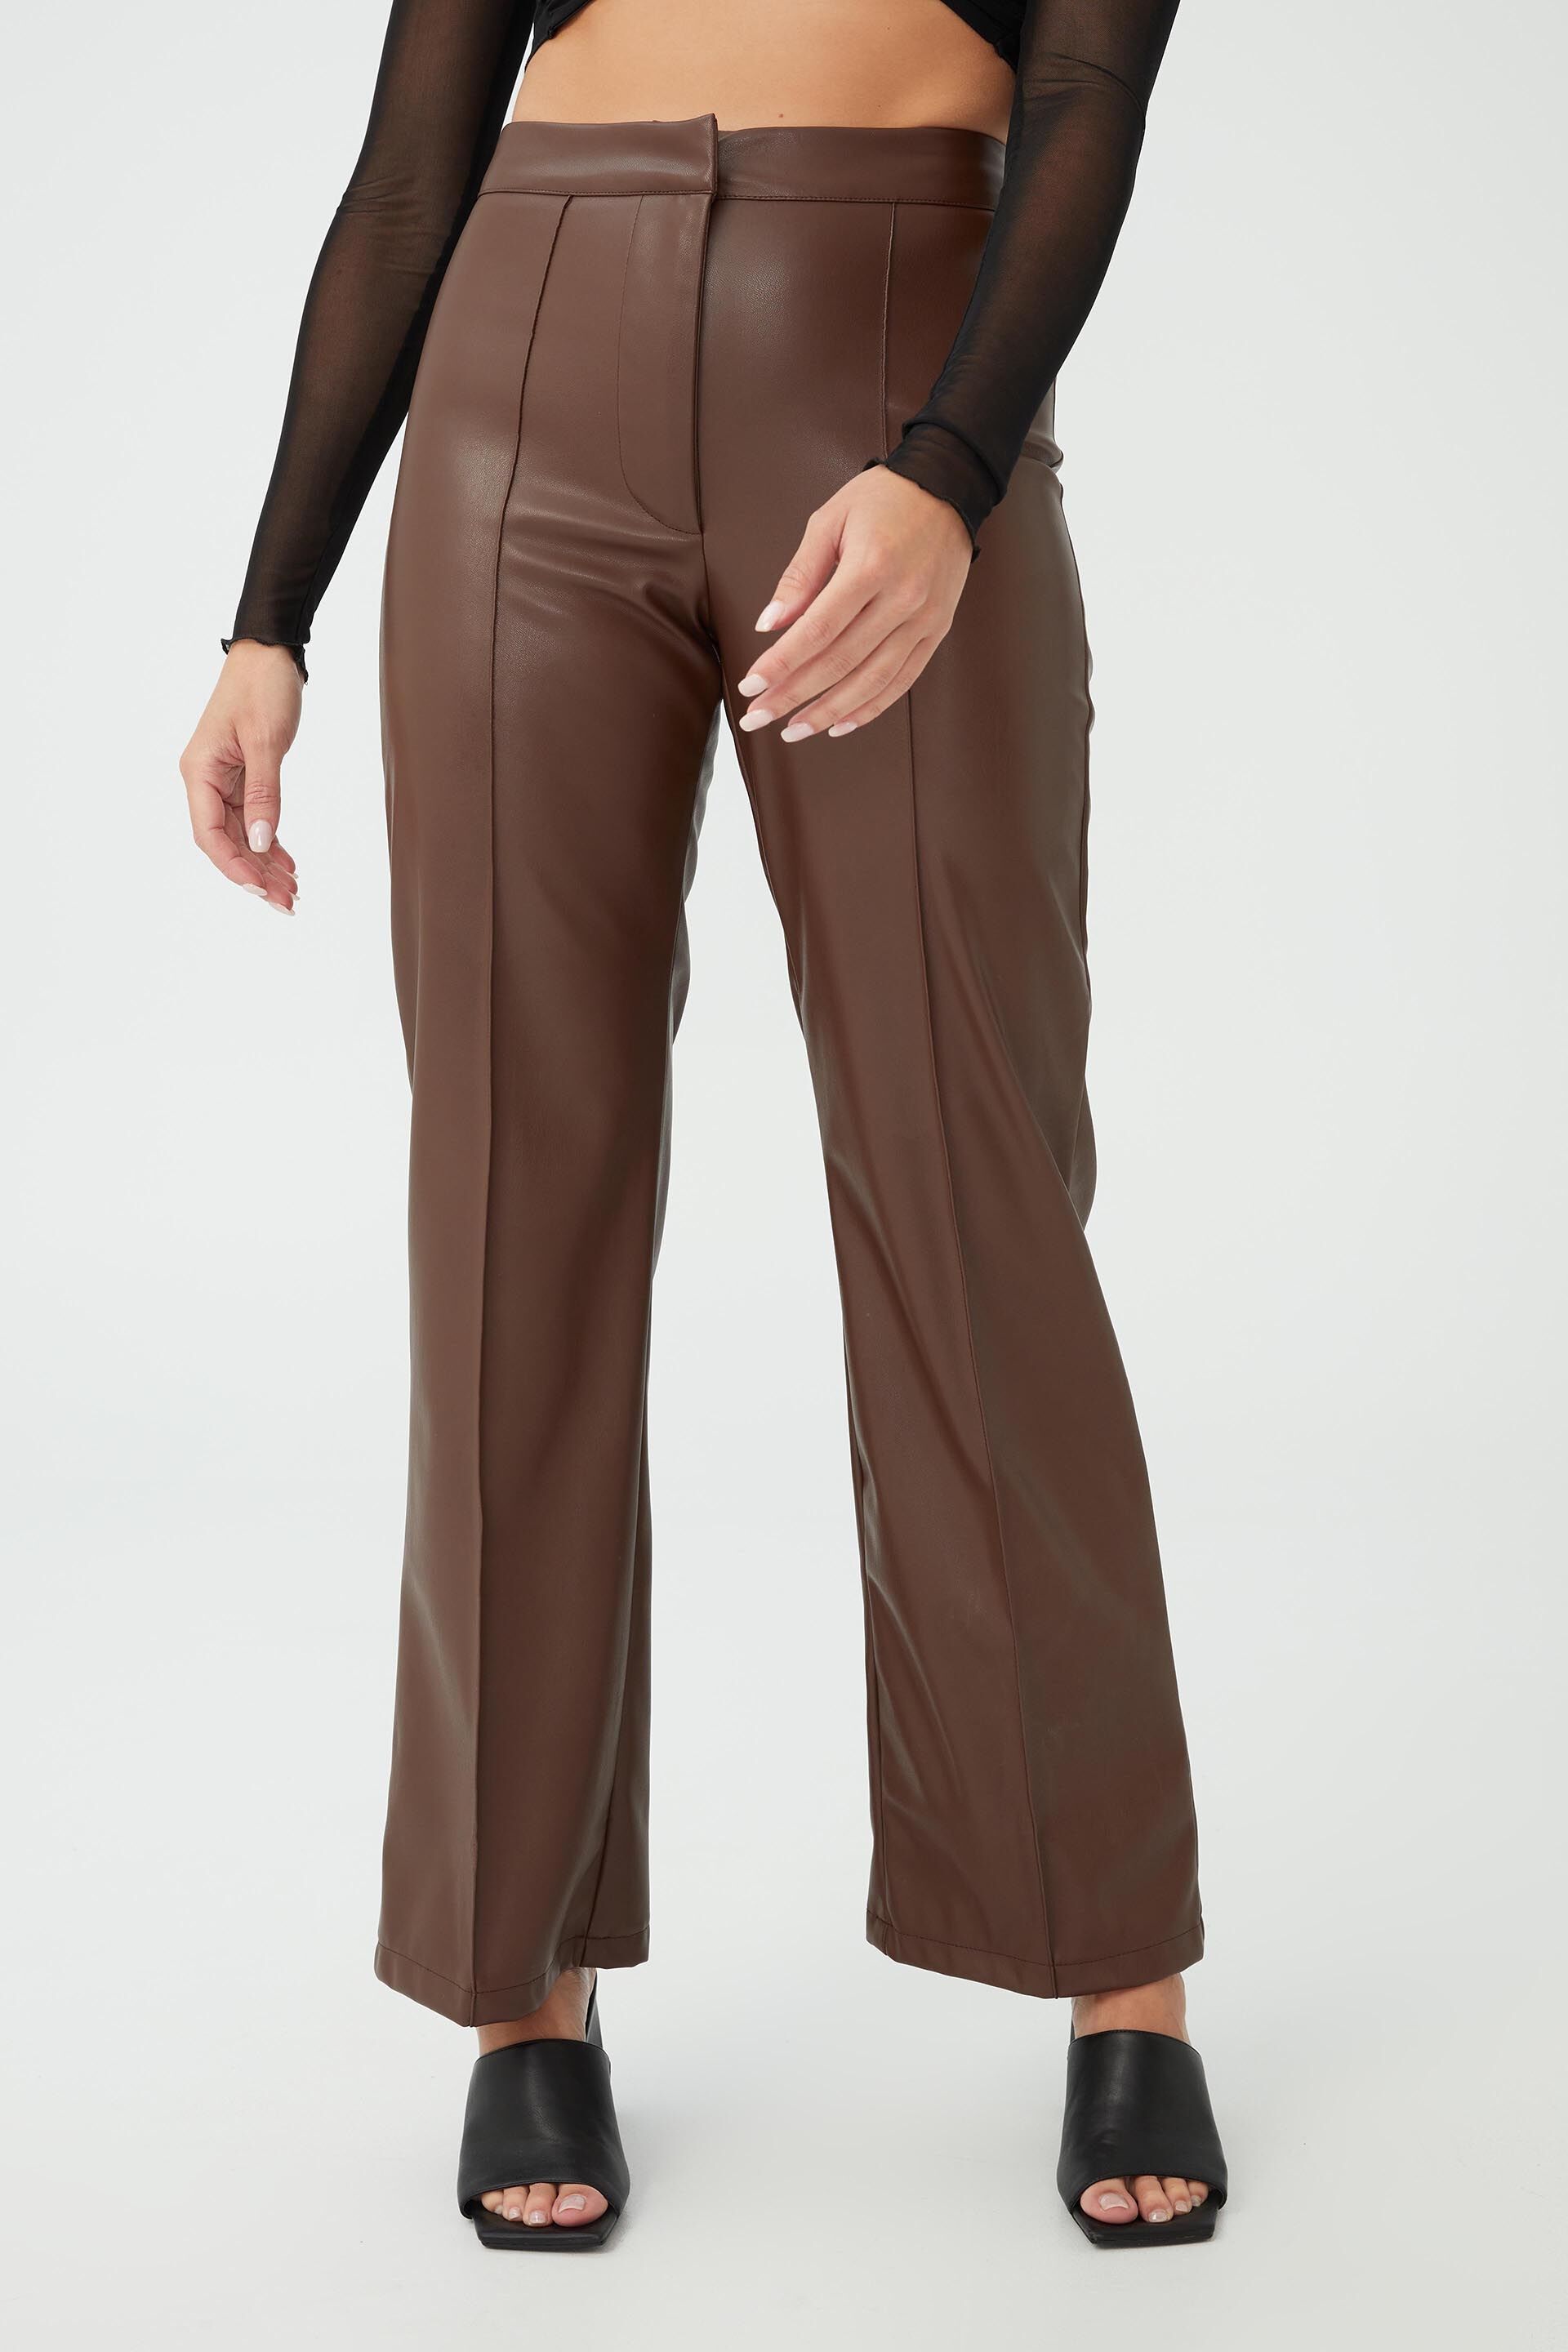 wide leg brown leather pants